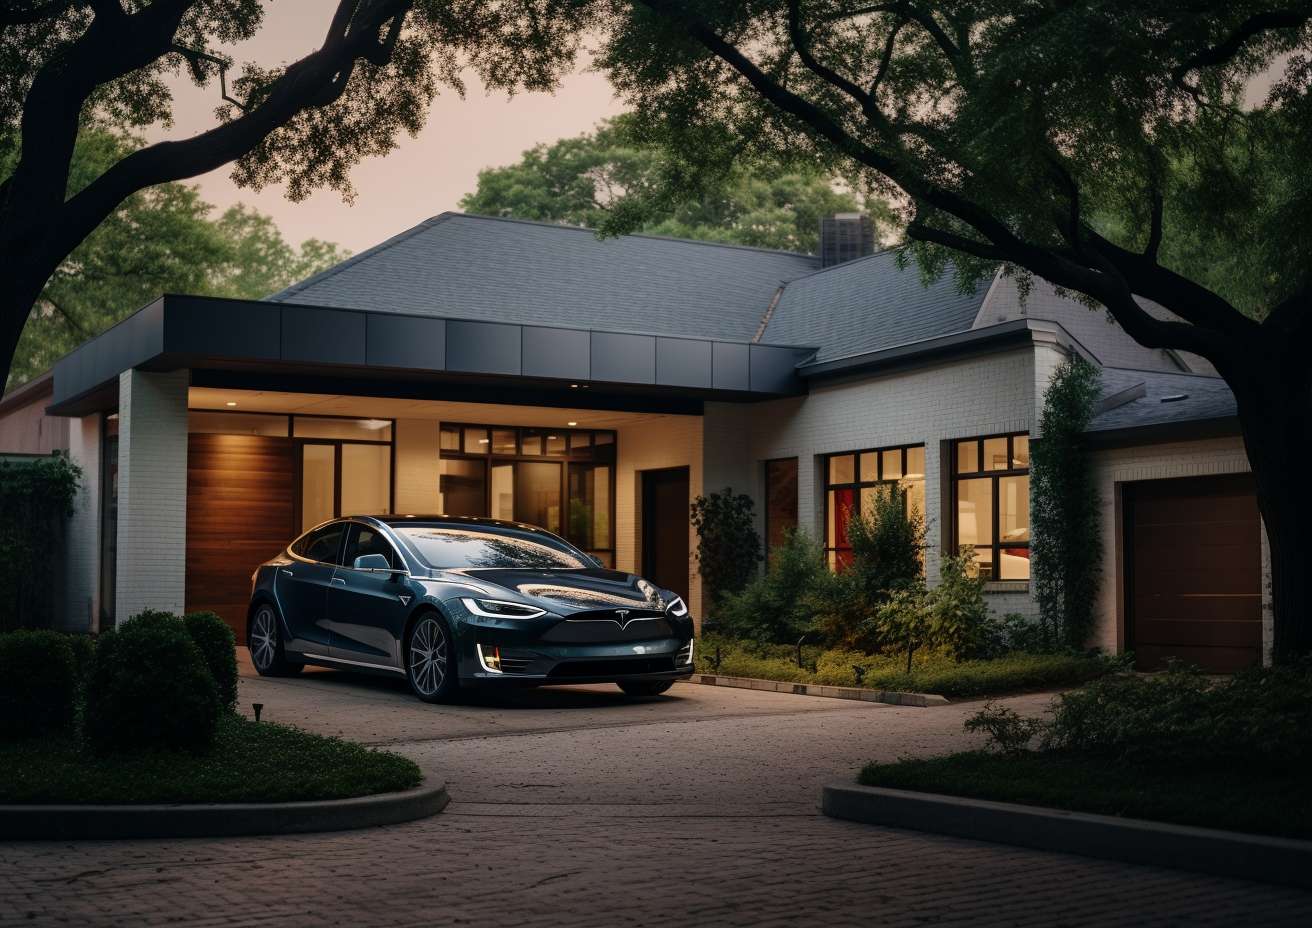 A Tesla Model X parked in front of a house in Dallas, TX at dusk.